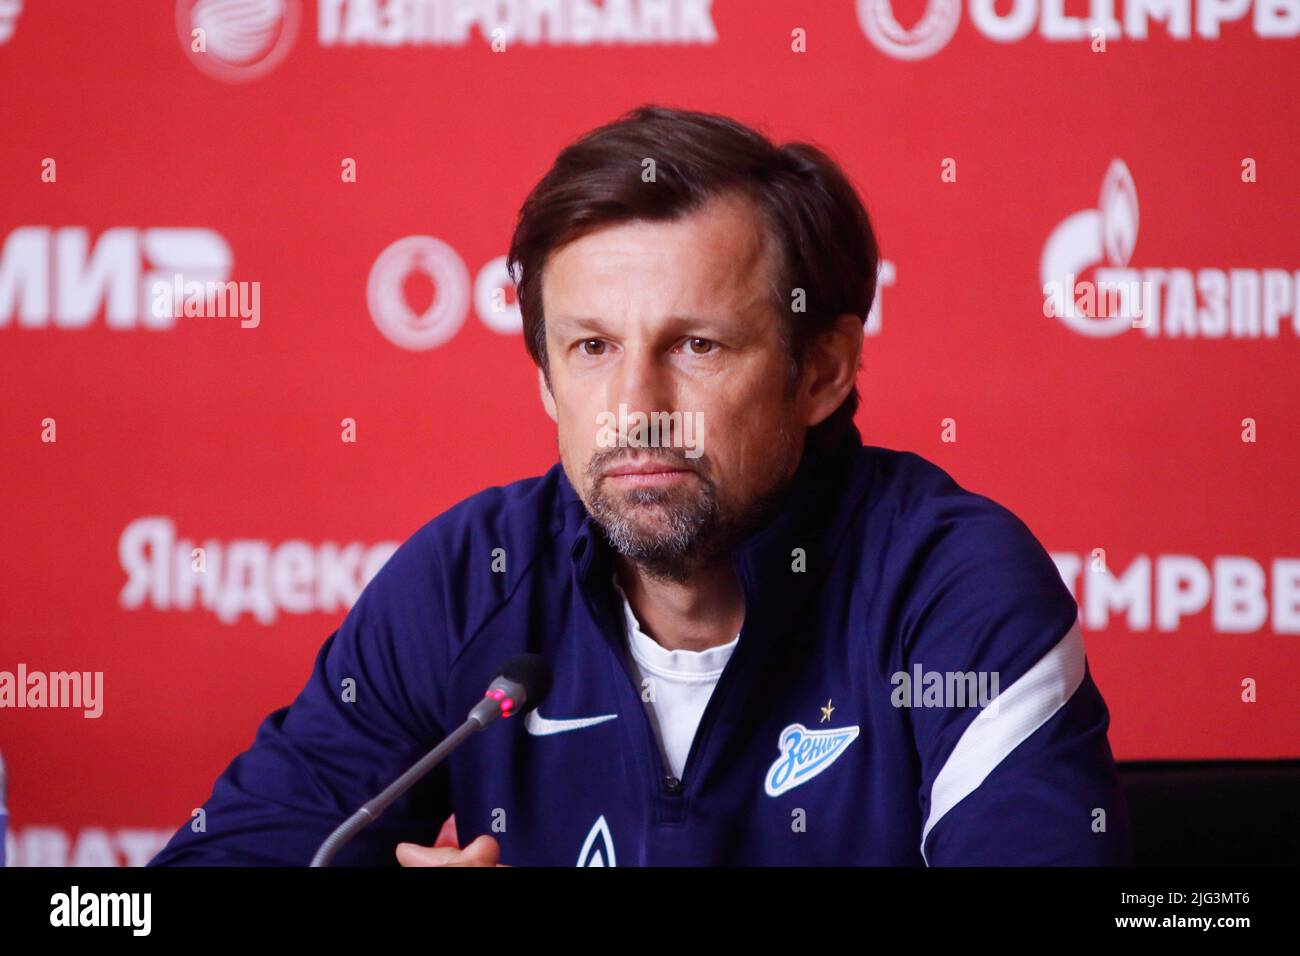 Saint Petersburg, Russia. 07th July, 2022. Head coach of Zenit football  club Sergei Semak in St. Petersburg at Gazprom Arena during a press  conference before the match for the Russian Football Super